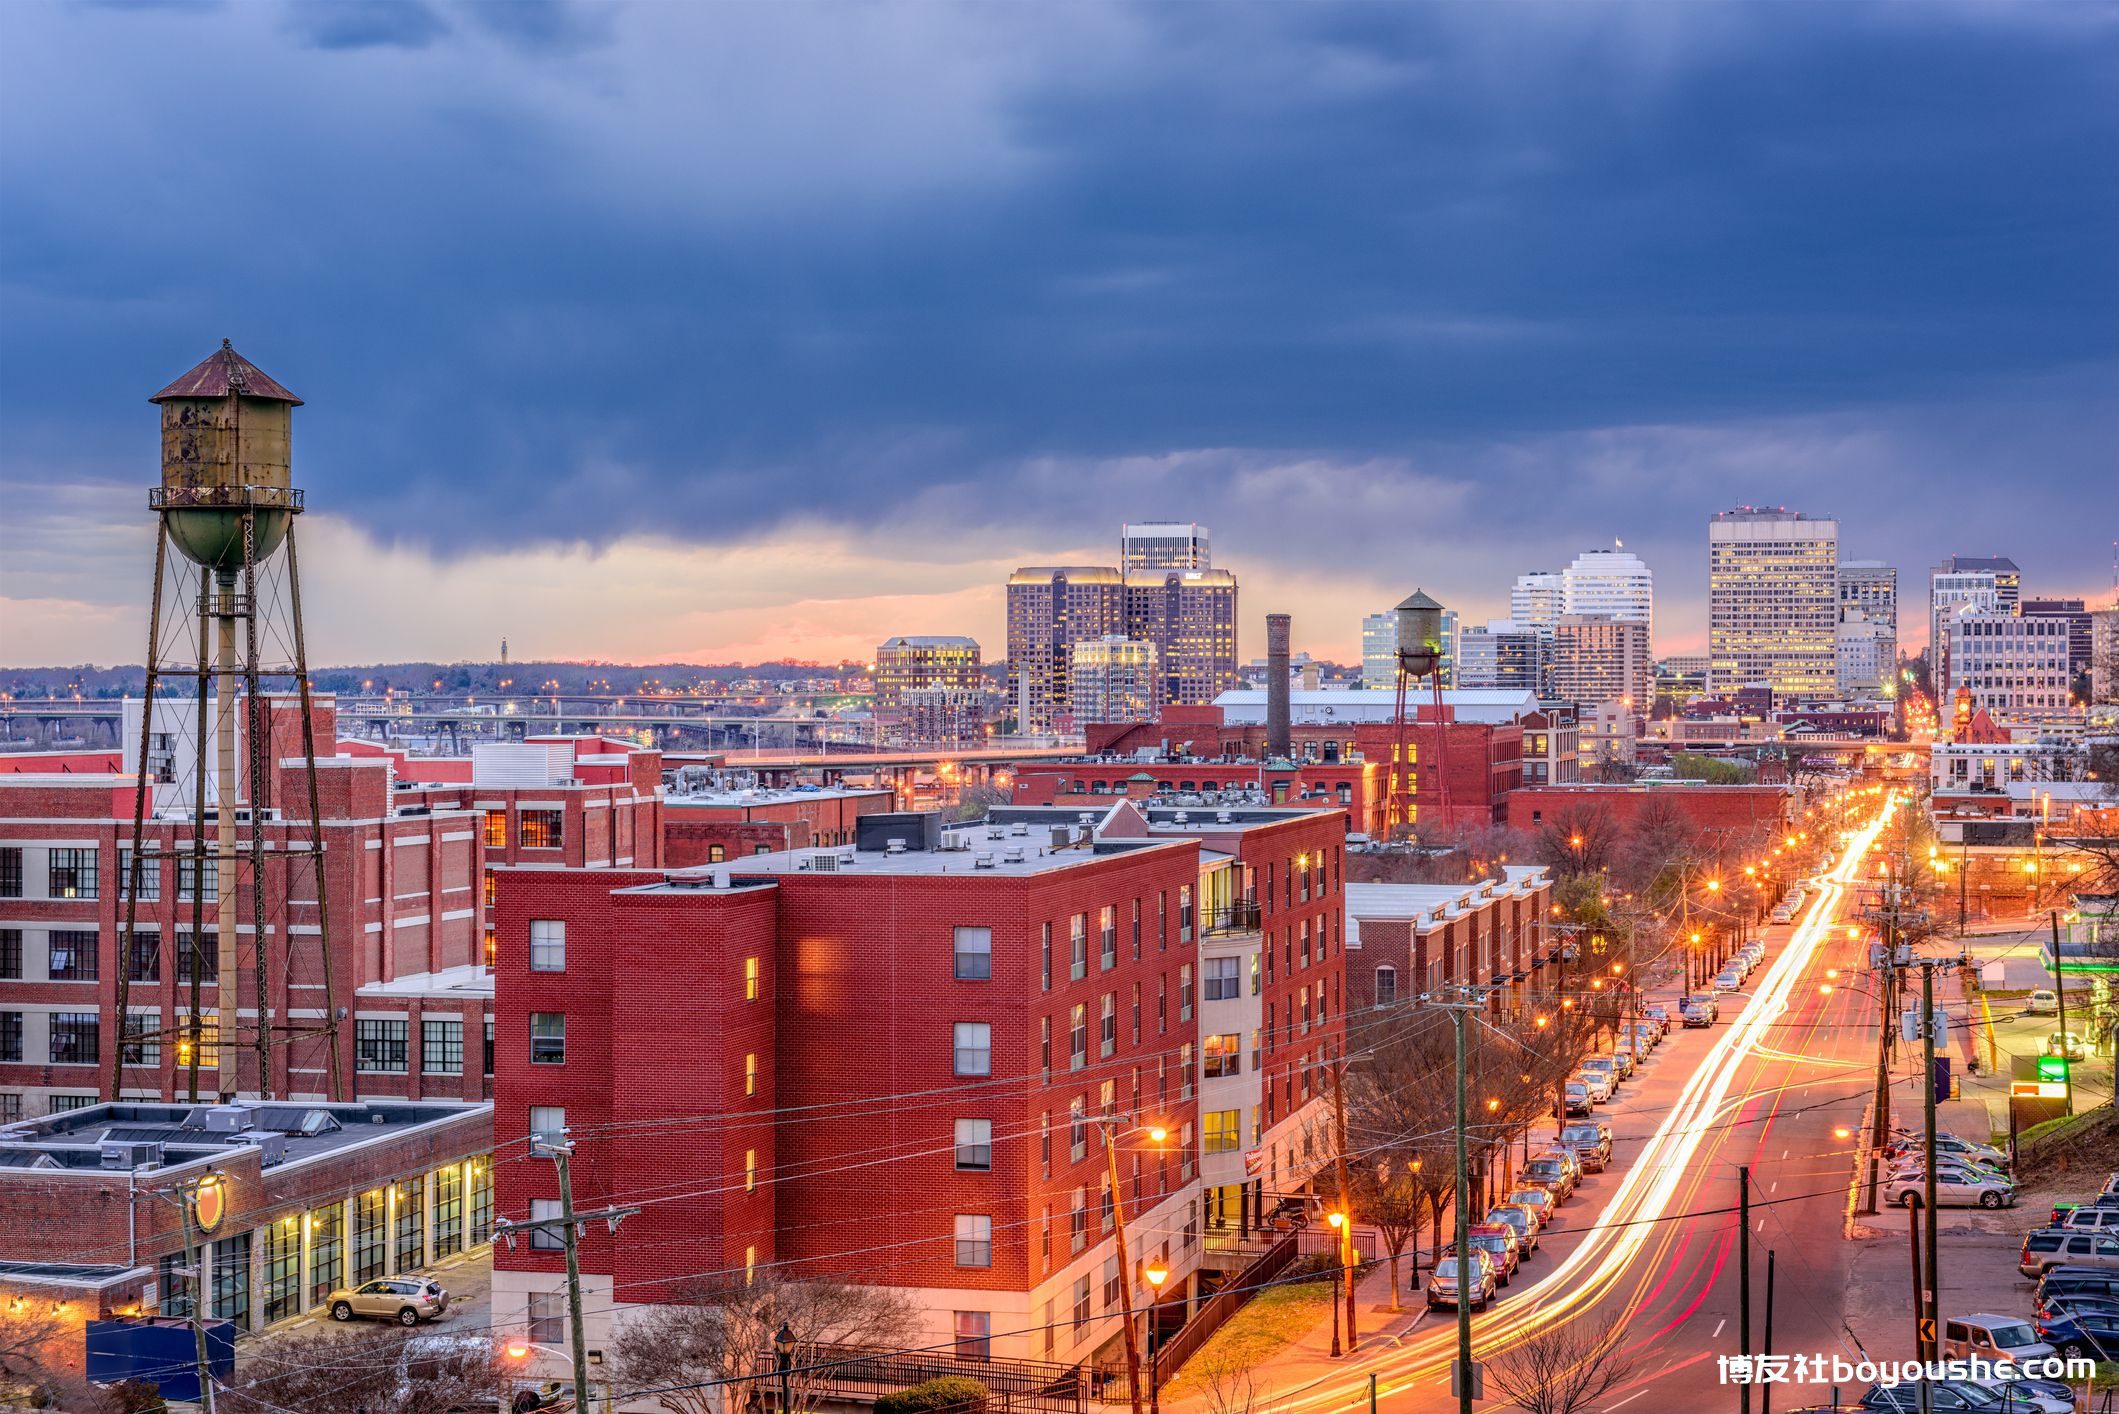 Top Things to Do in Richmond, Virginia